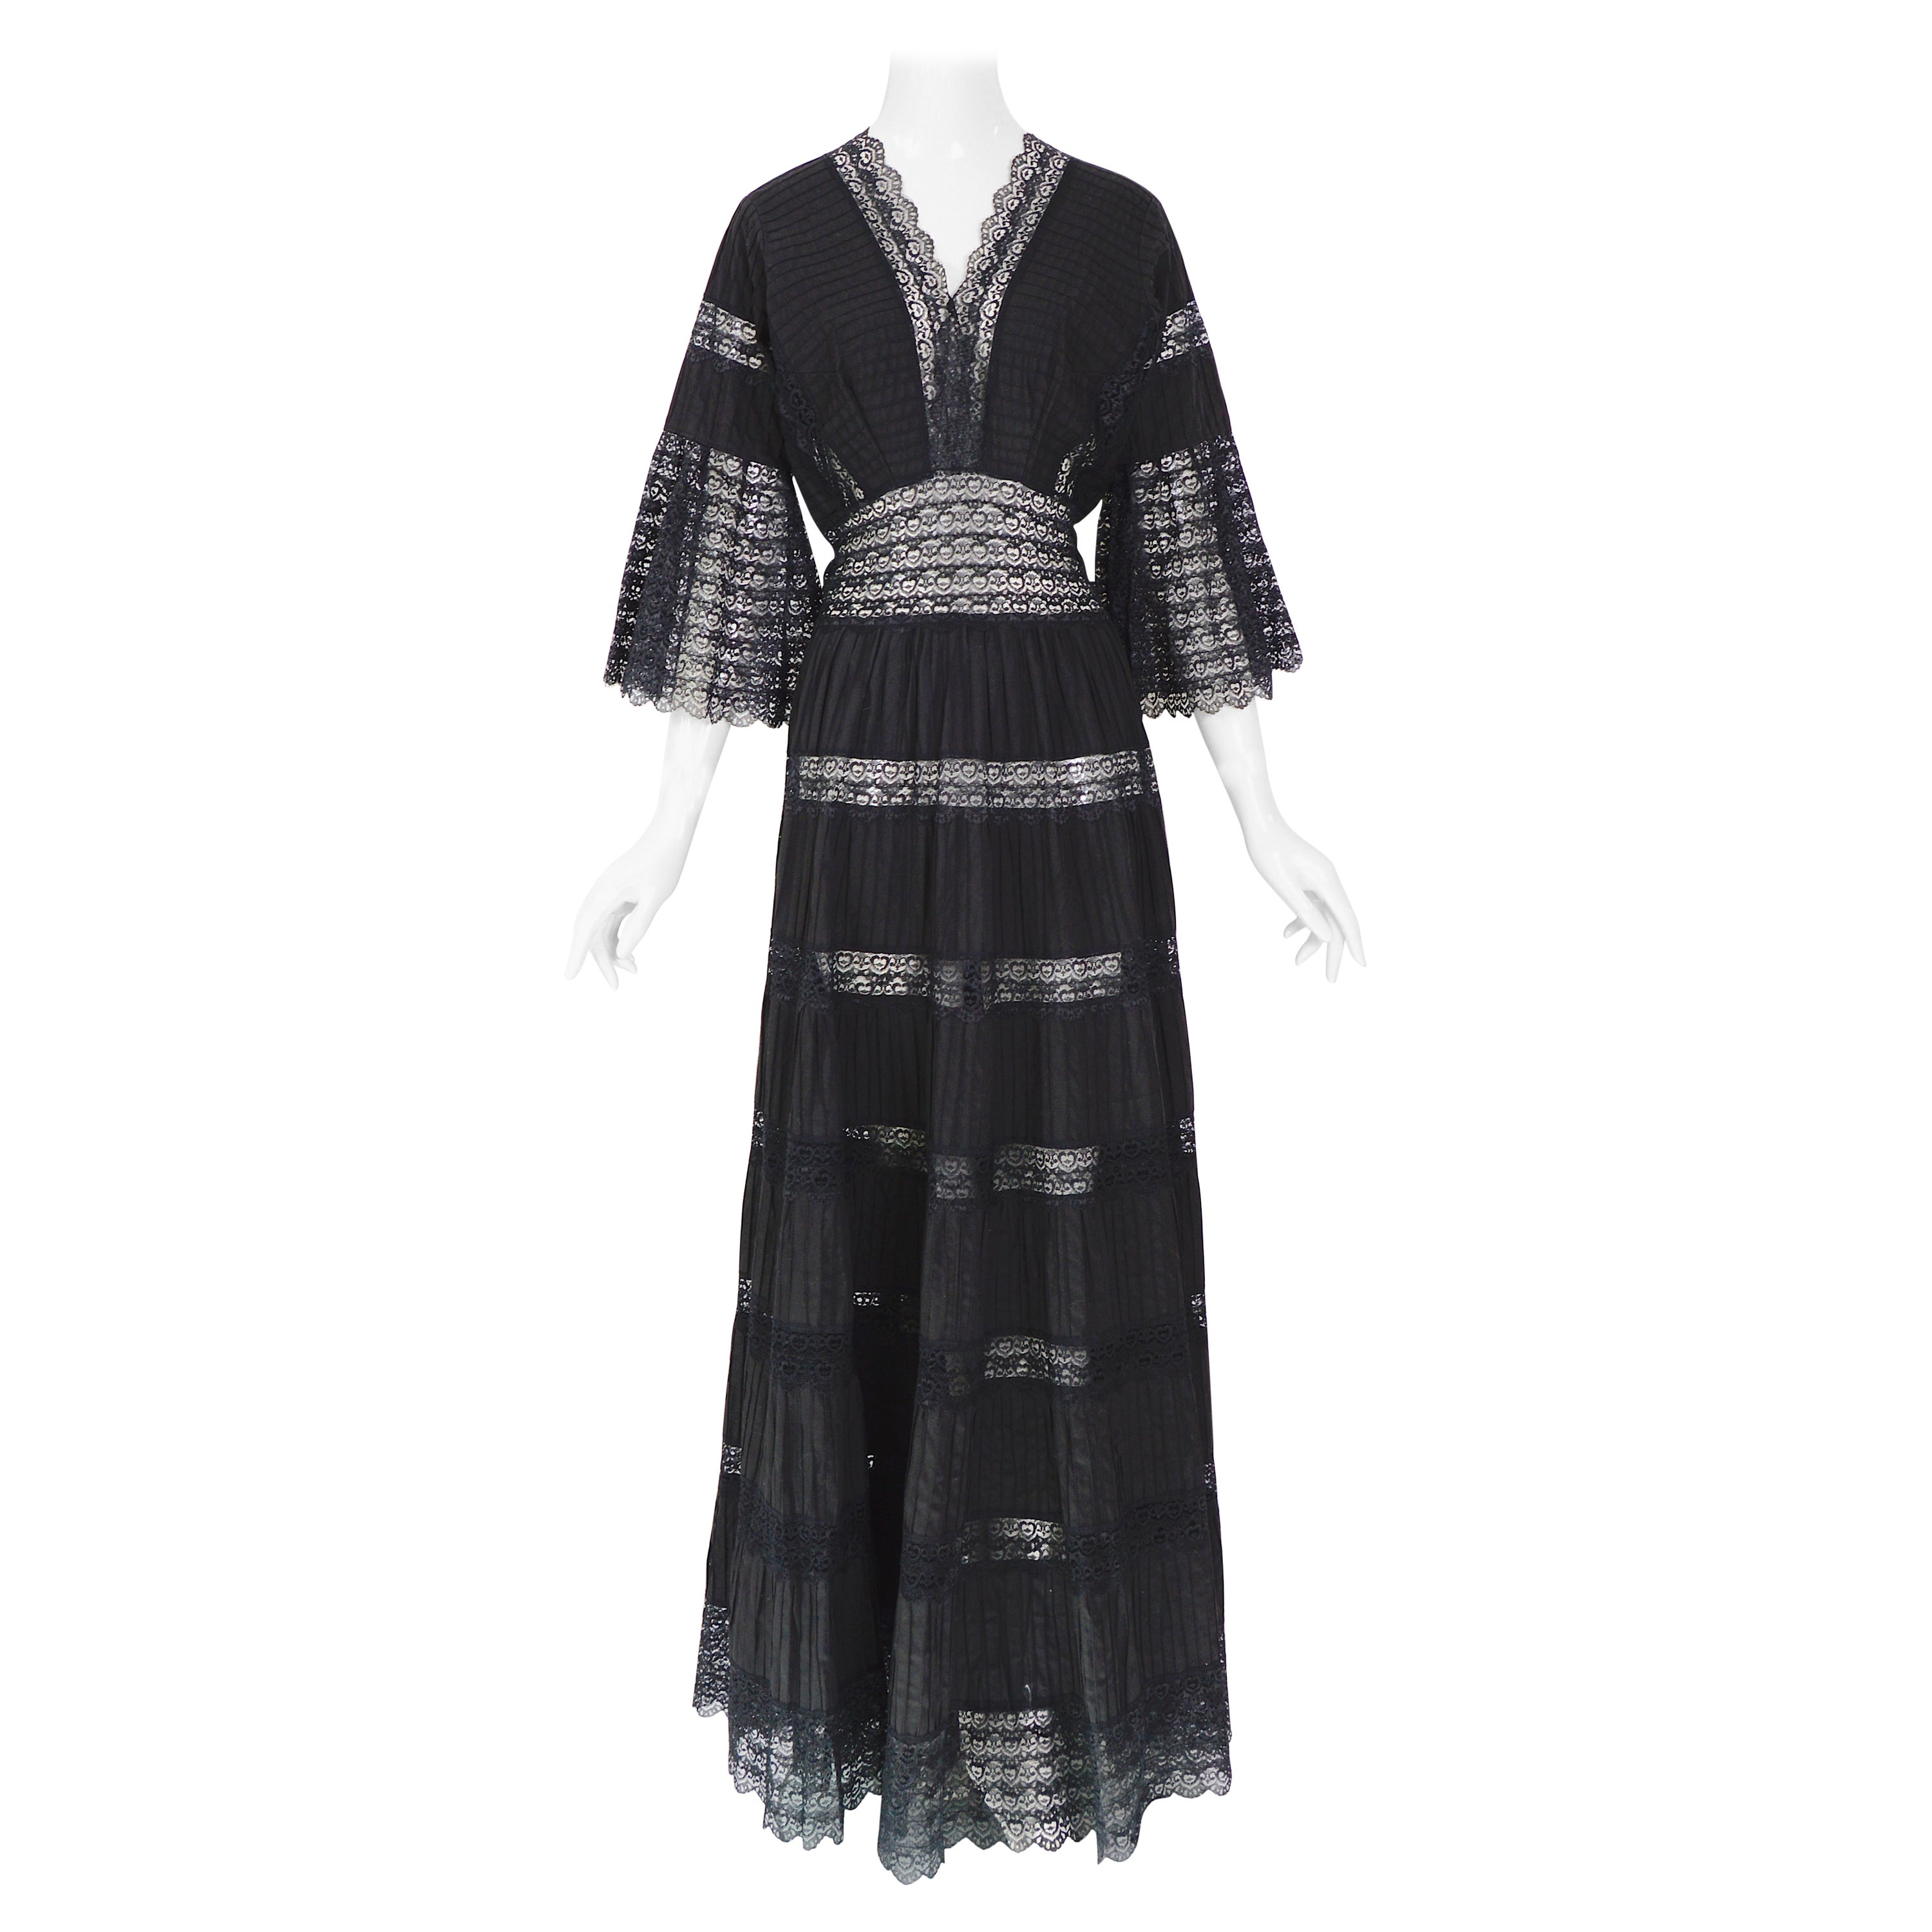 Vintage 1970s jet black cotton and lace Mexican gown